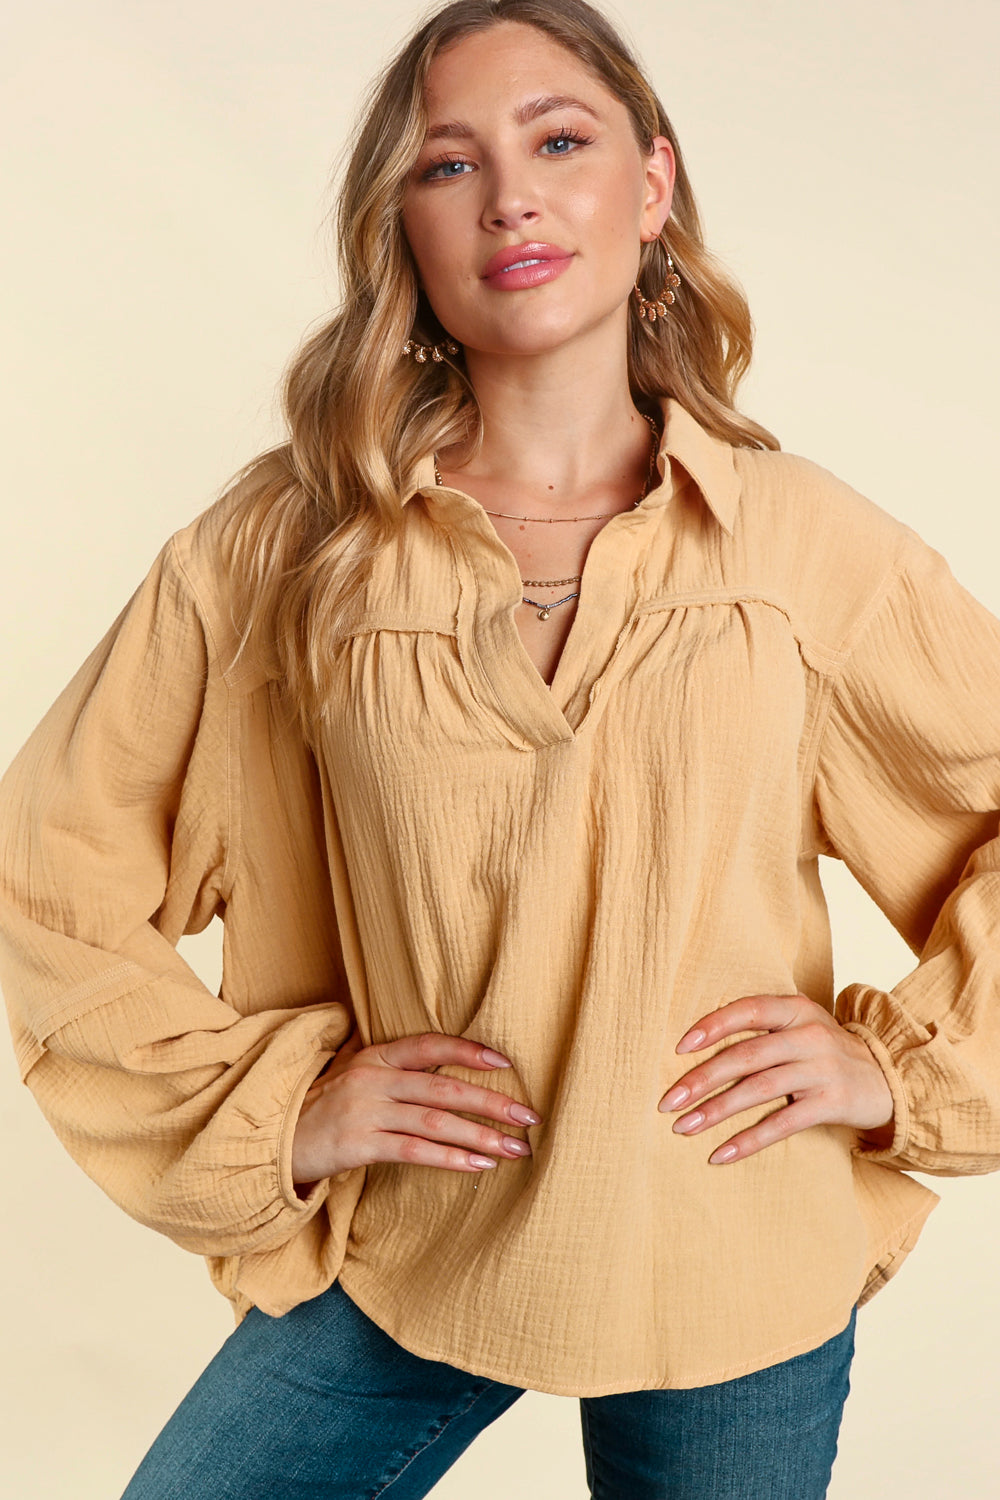 Baby Doll Tops in Taupe | Babydoll Blouse | Autumn Grove Clothing